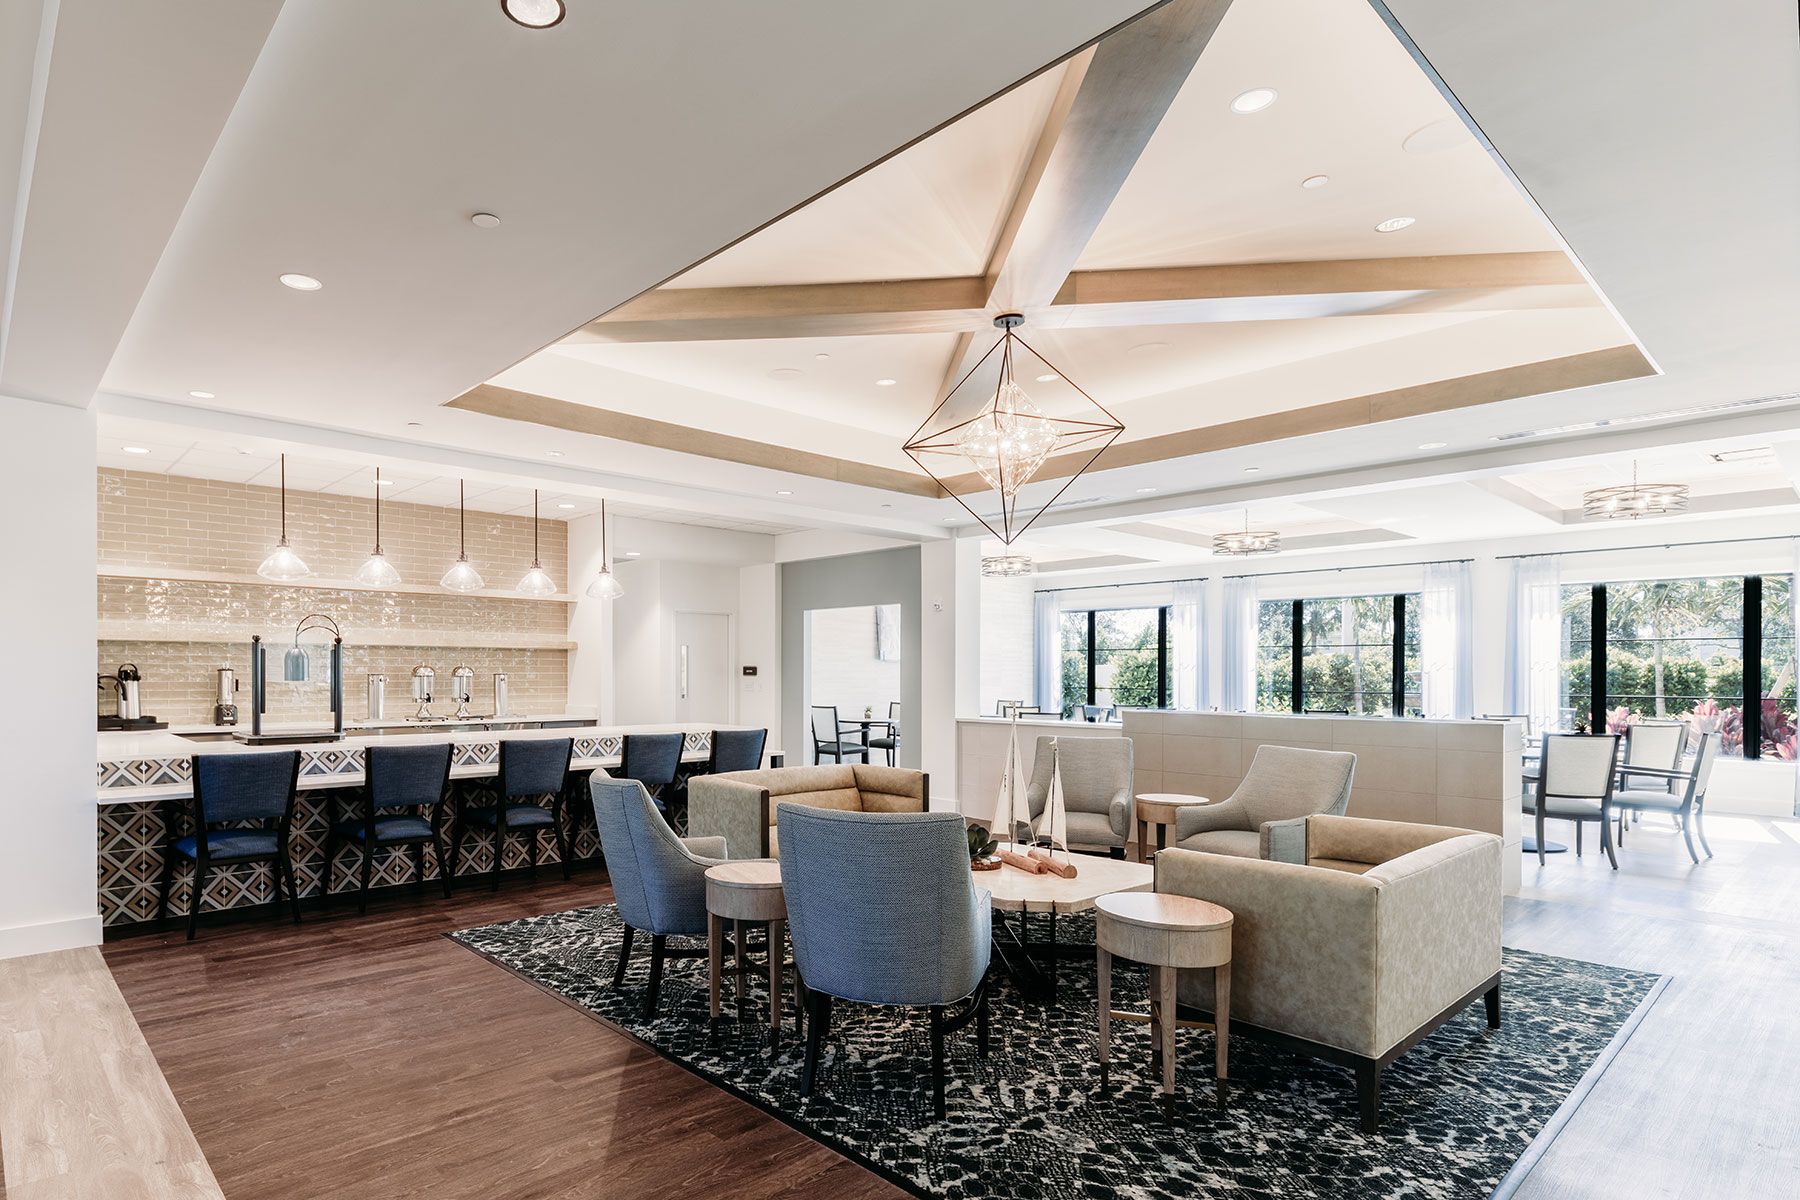 Interior view of The Capstone at Royal Palm senior living community featuring elegant dining room decor.